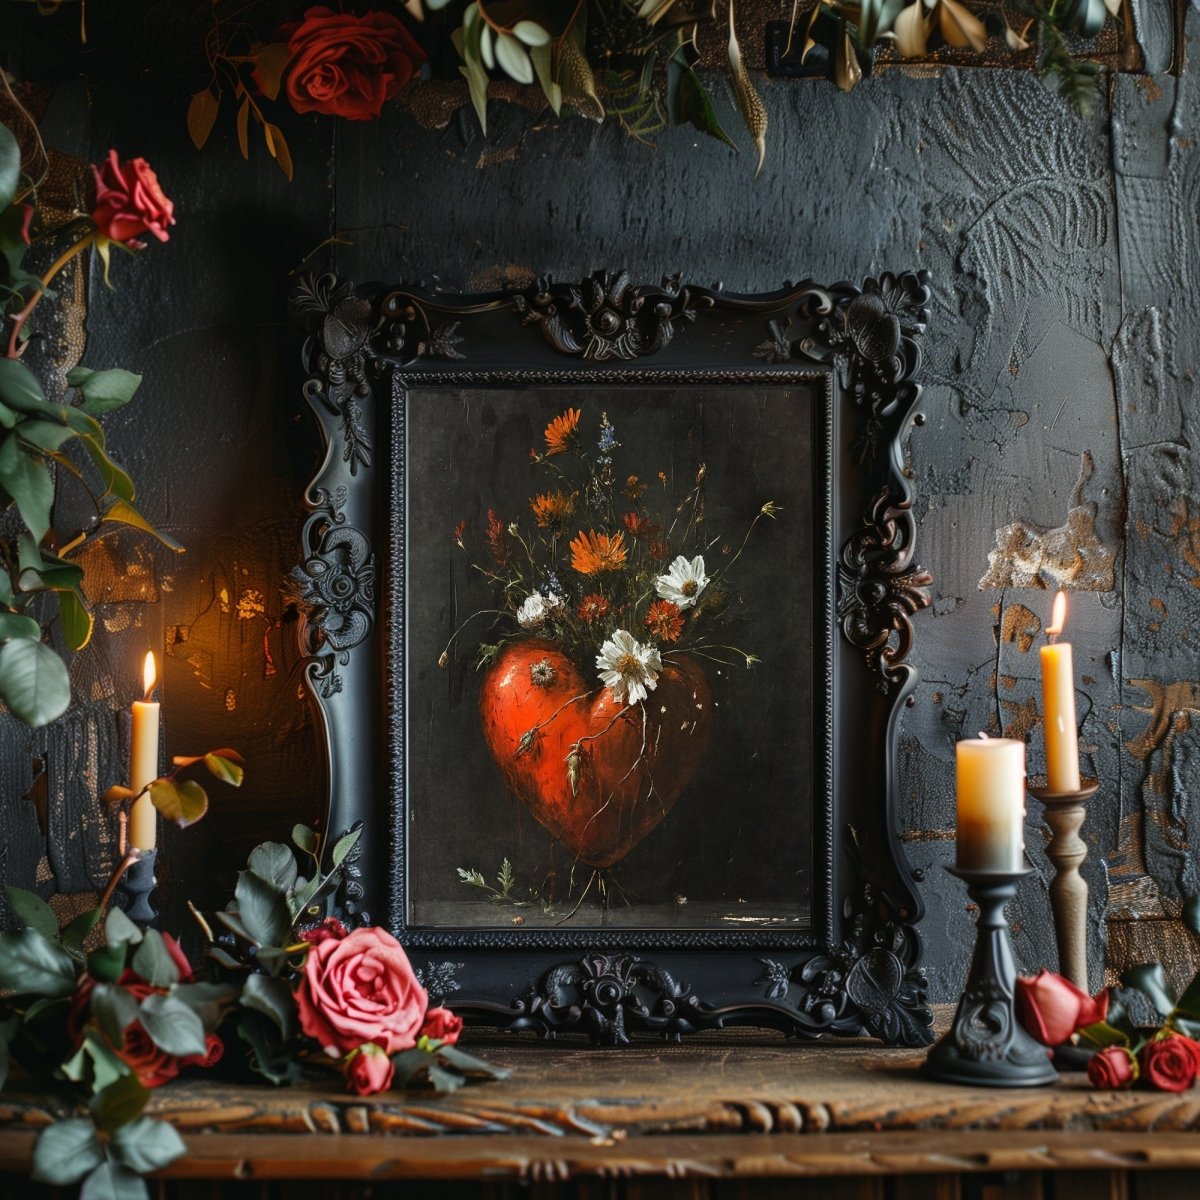 Valentine Wildflowers Wall Art Still Life Oil Painting Heart with Wildflowers Gothic Decor Goblincore Decor Dark Romance Print Paper Poster Print - Everything Pixel